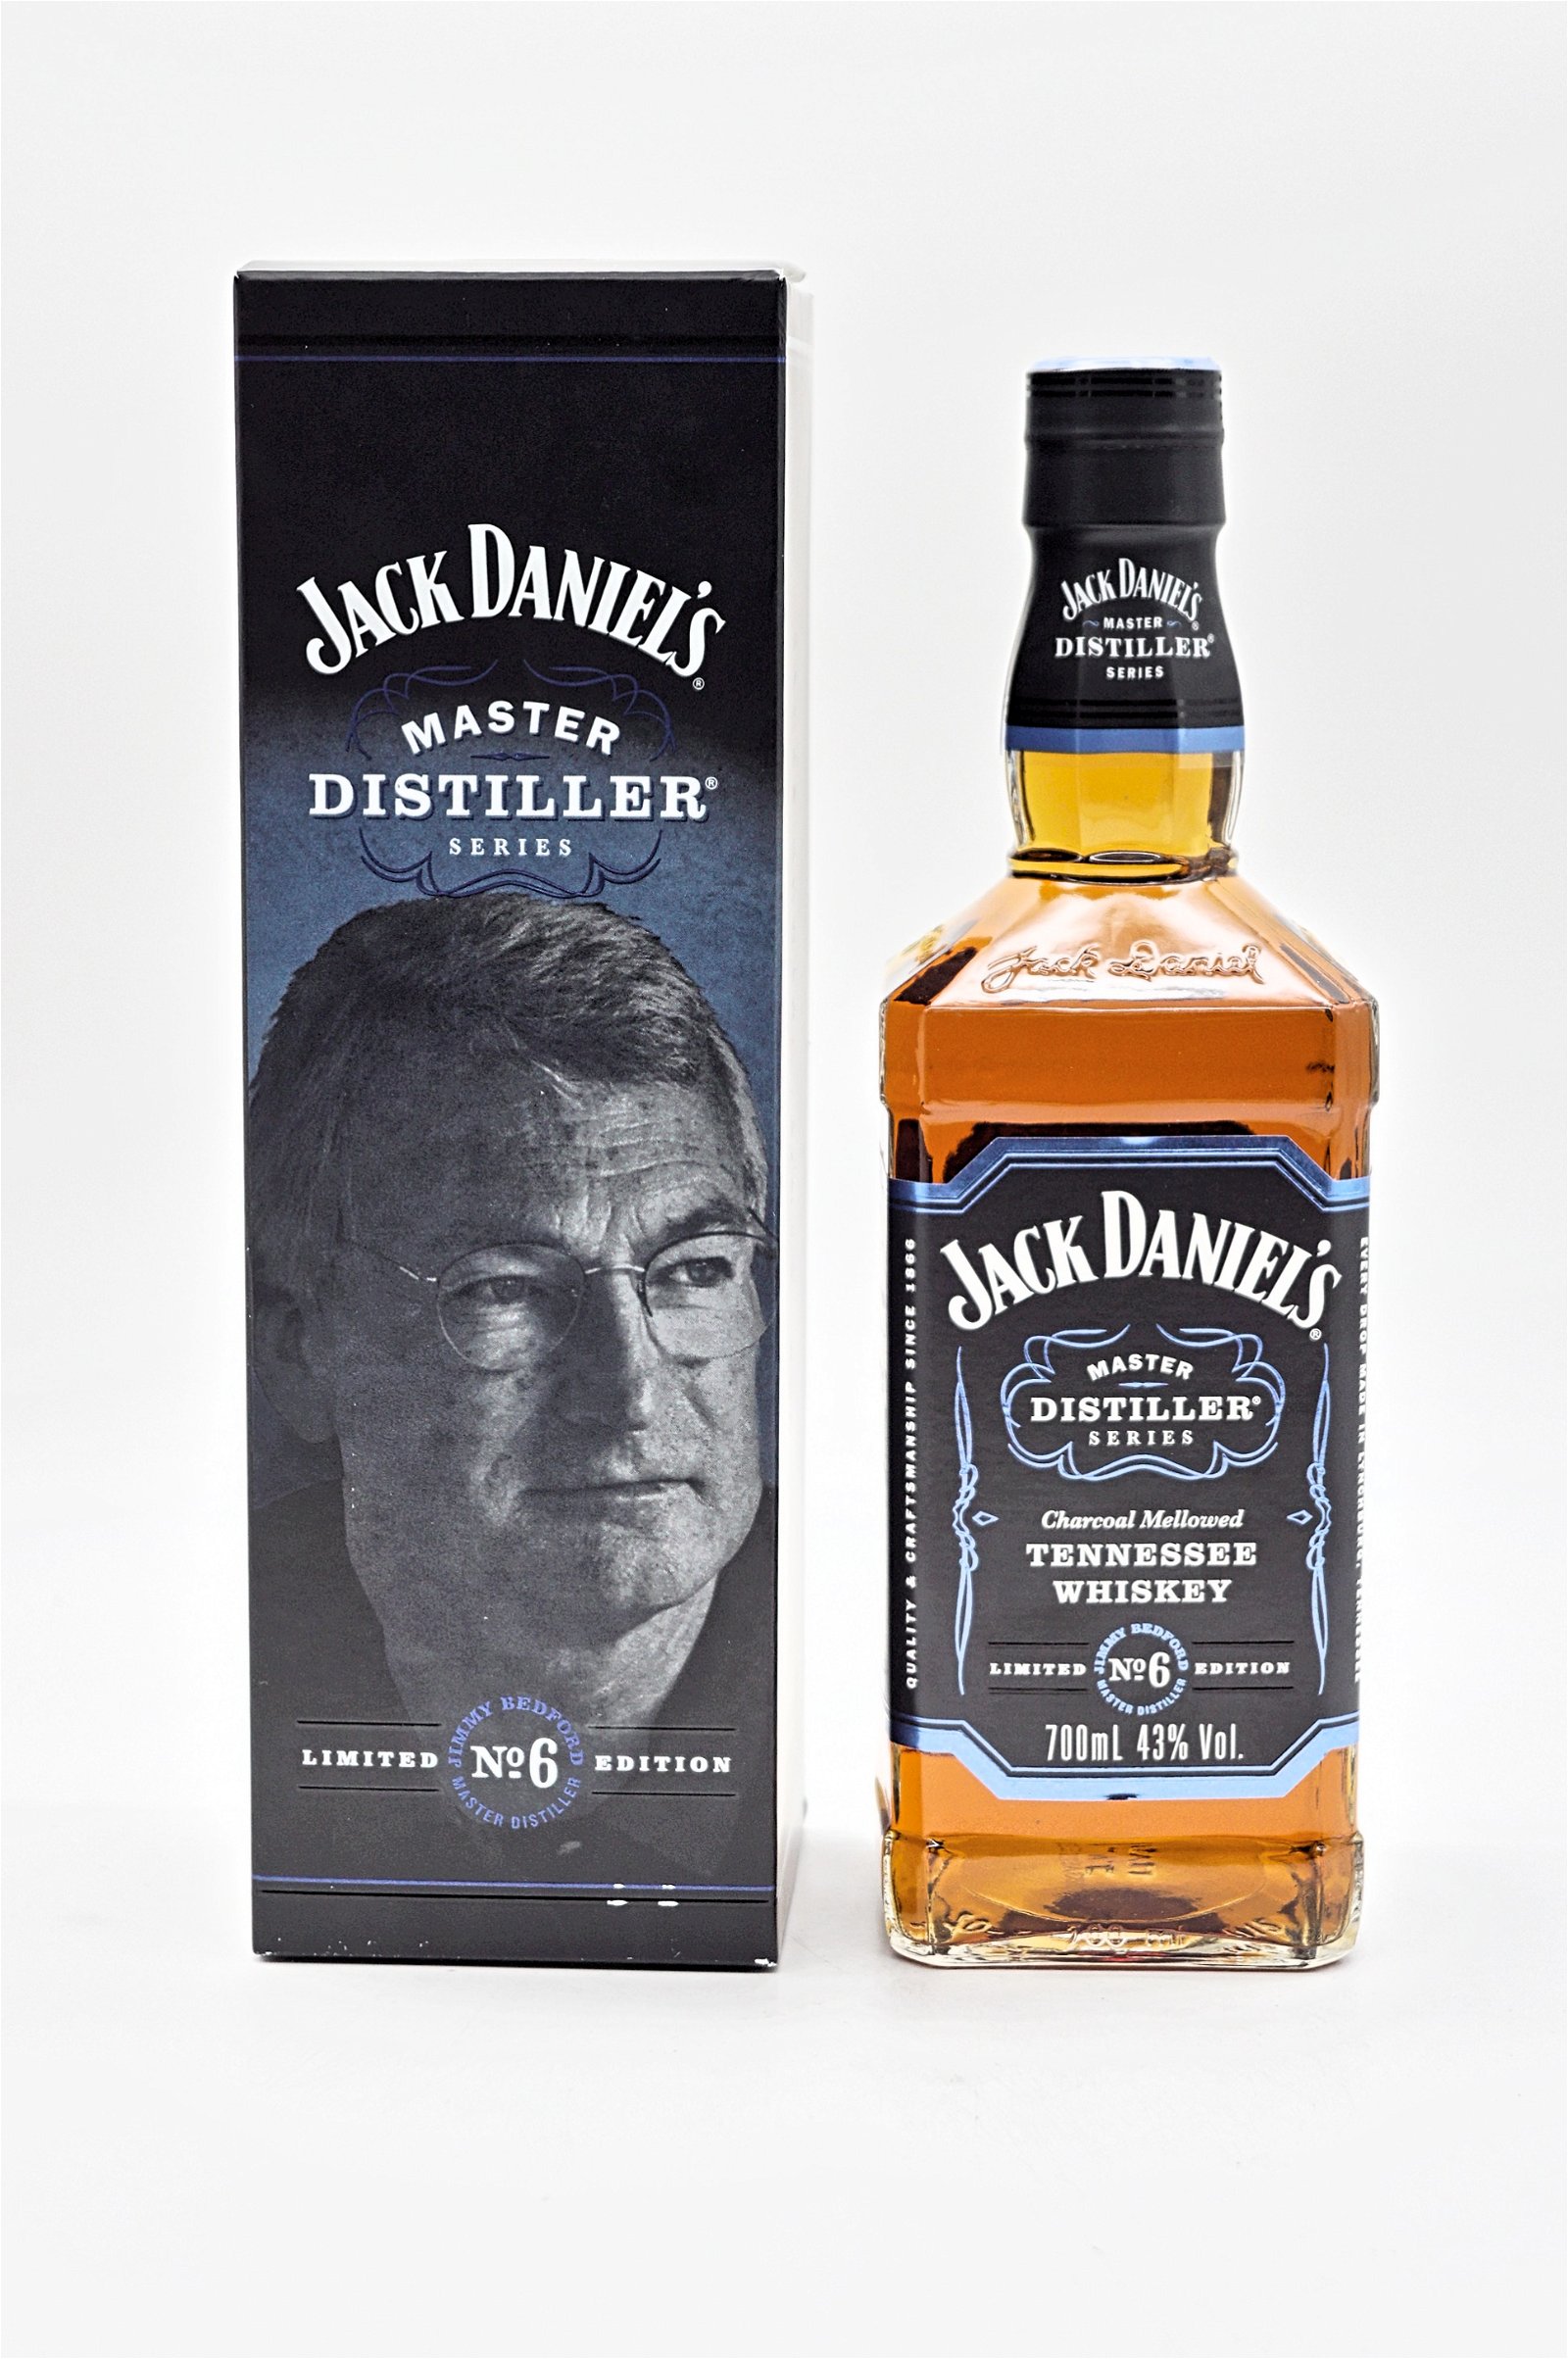 Jack Daniels Master Distiller Series No 6 Limited Edition Tennessee Whiskey